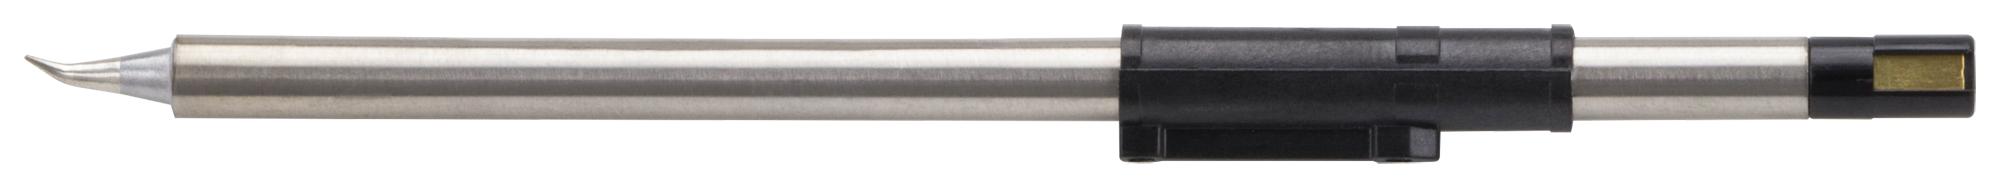 1124-0003 TIP CARTRIDGE, BENT CONICAL, 0.4MM PACE